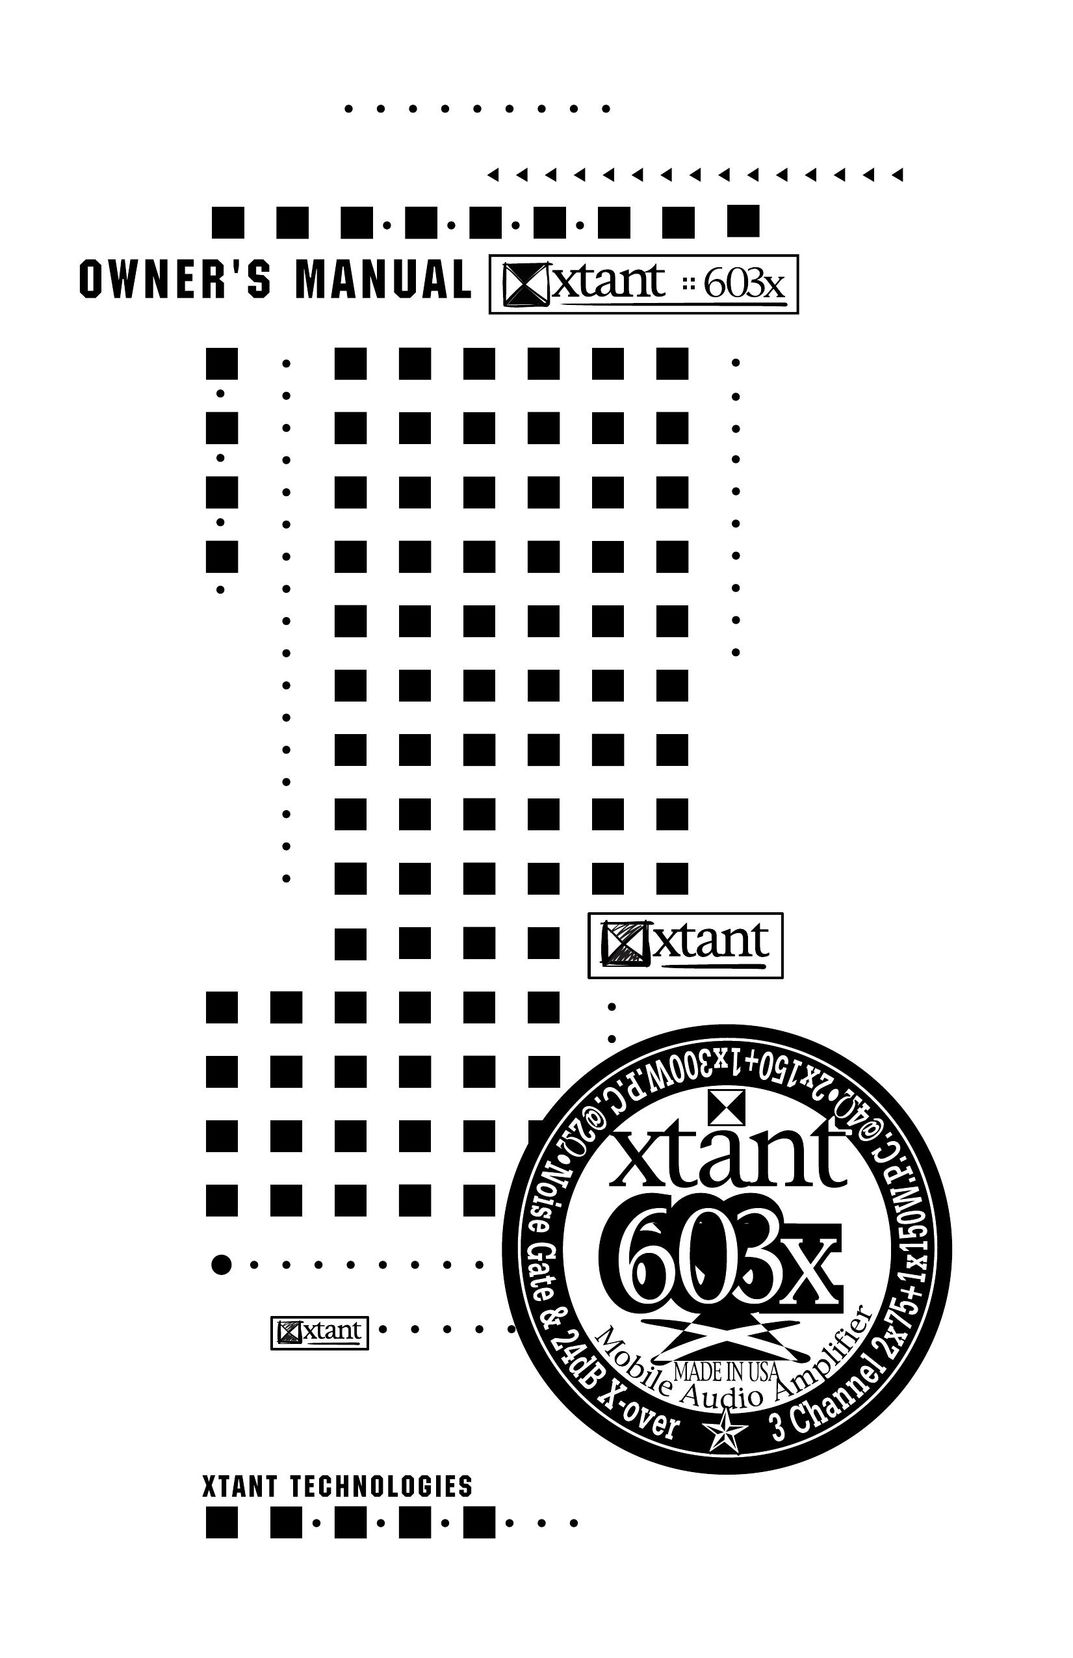 Xtant Model 603x Stereo Amplifier User Manual